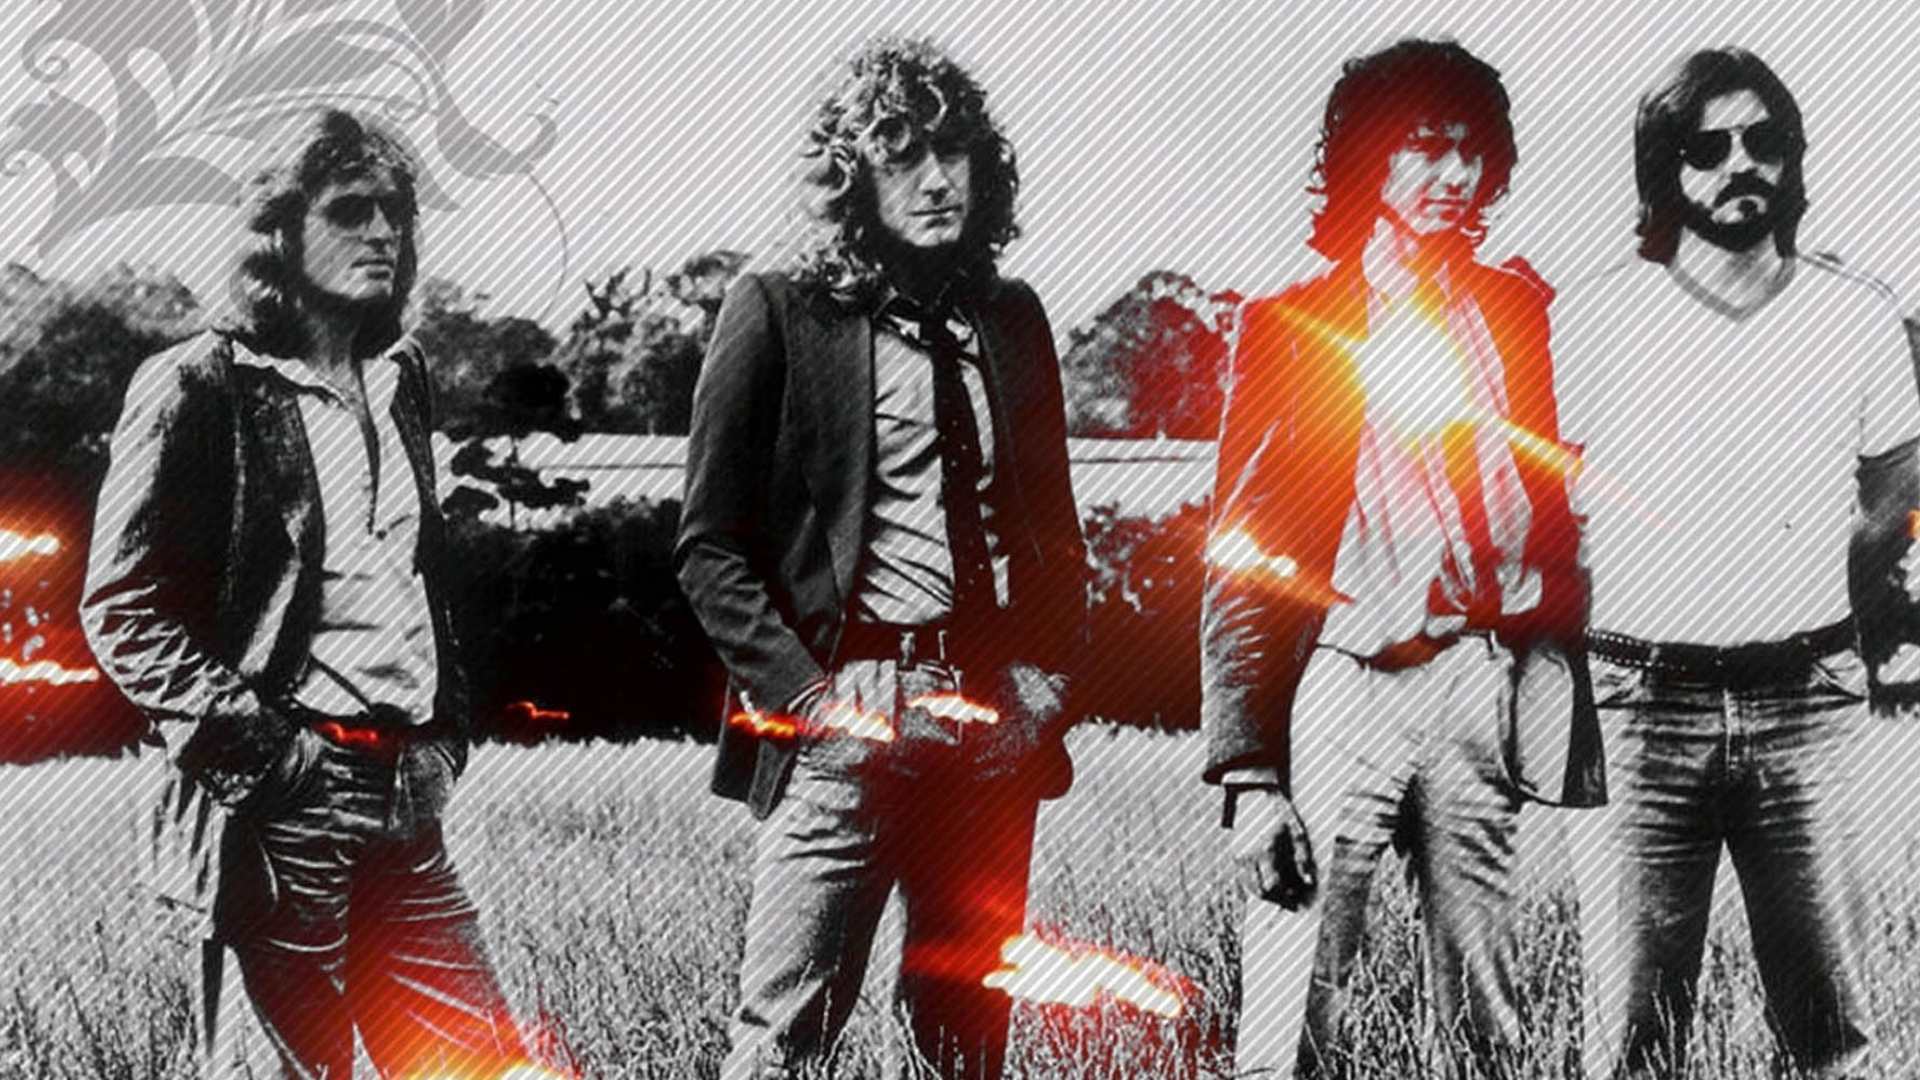 Led Zeppelin hard rock classic groups bands jimmy page robert